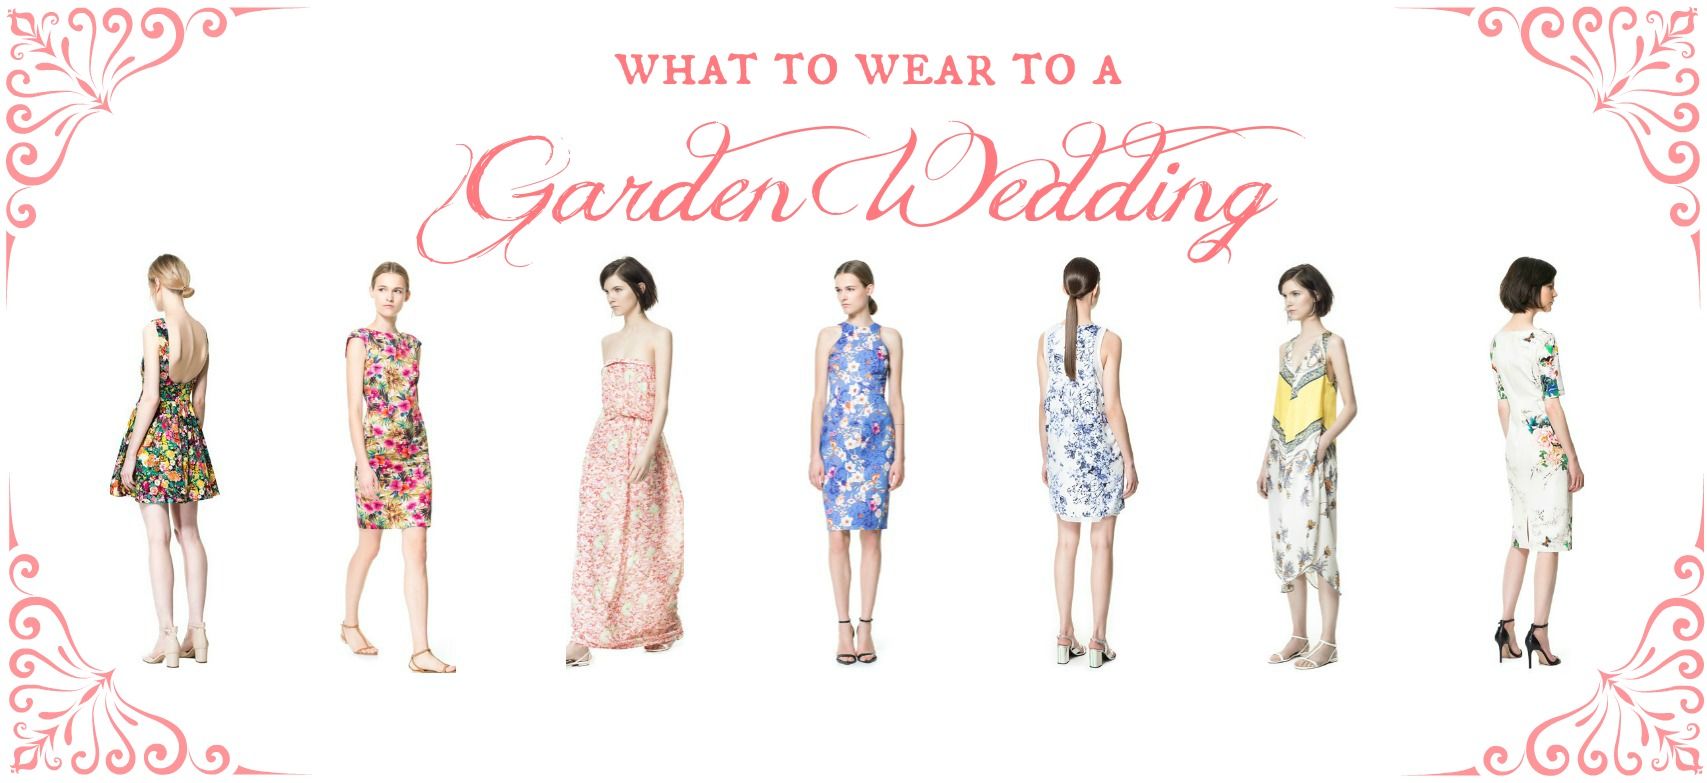 What To Wear To A Garden Wedding Rustic Wedding Chic